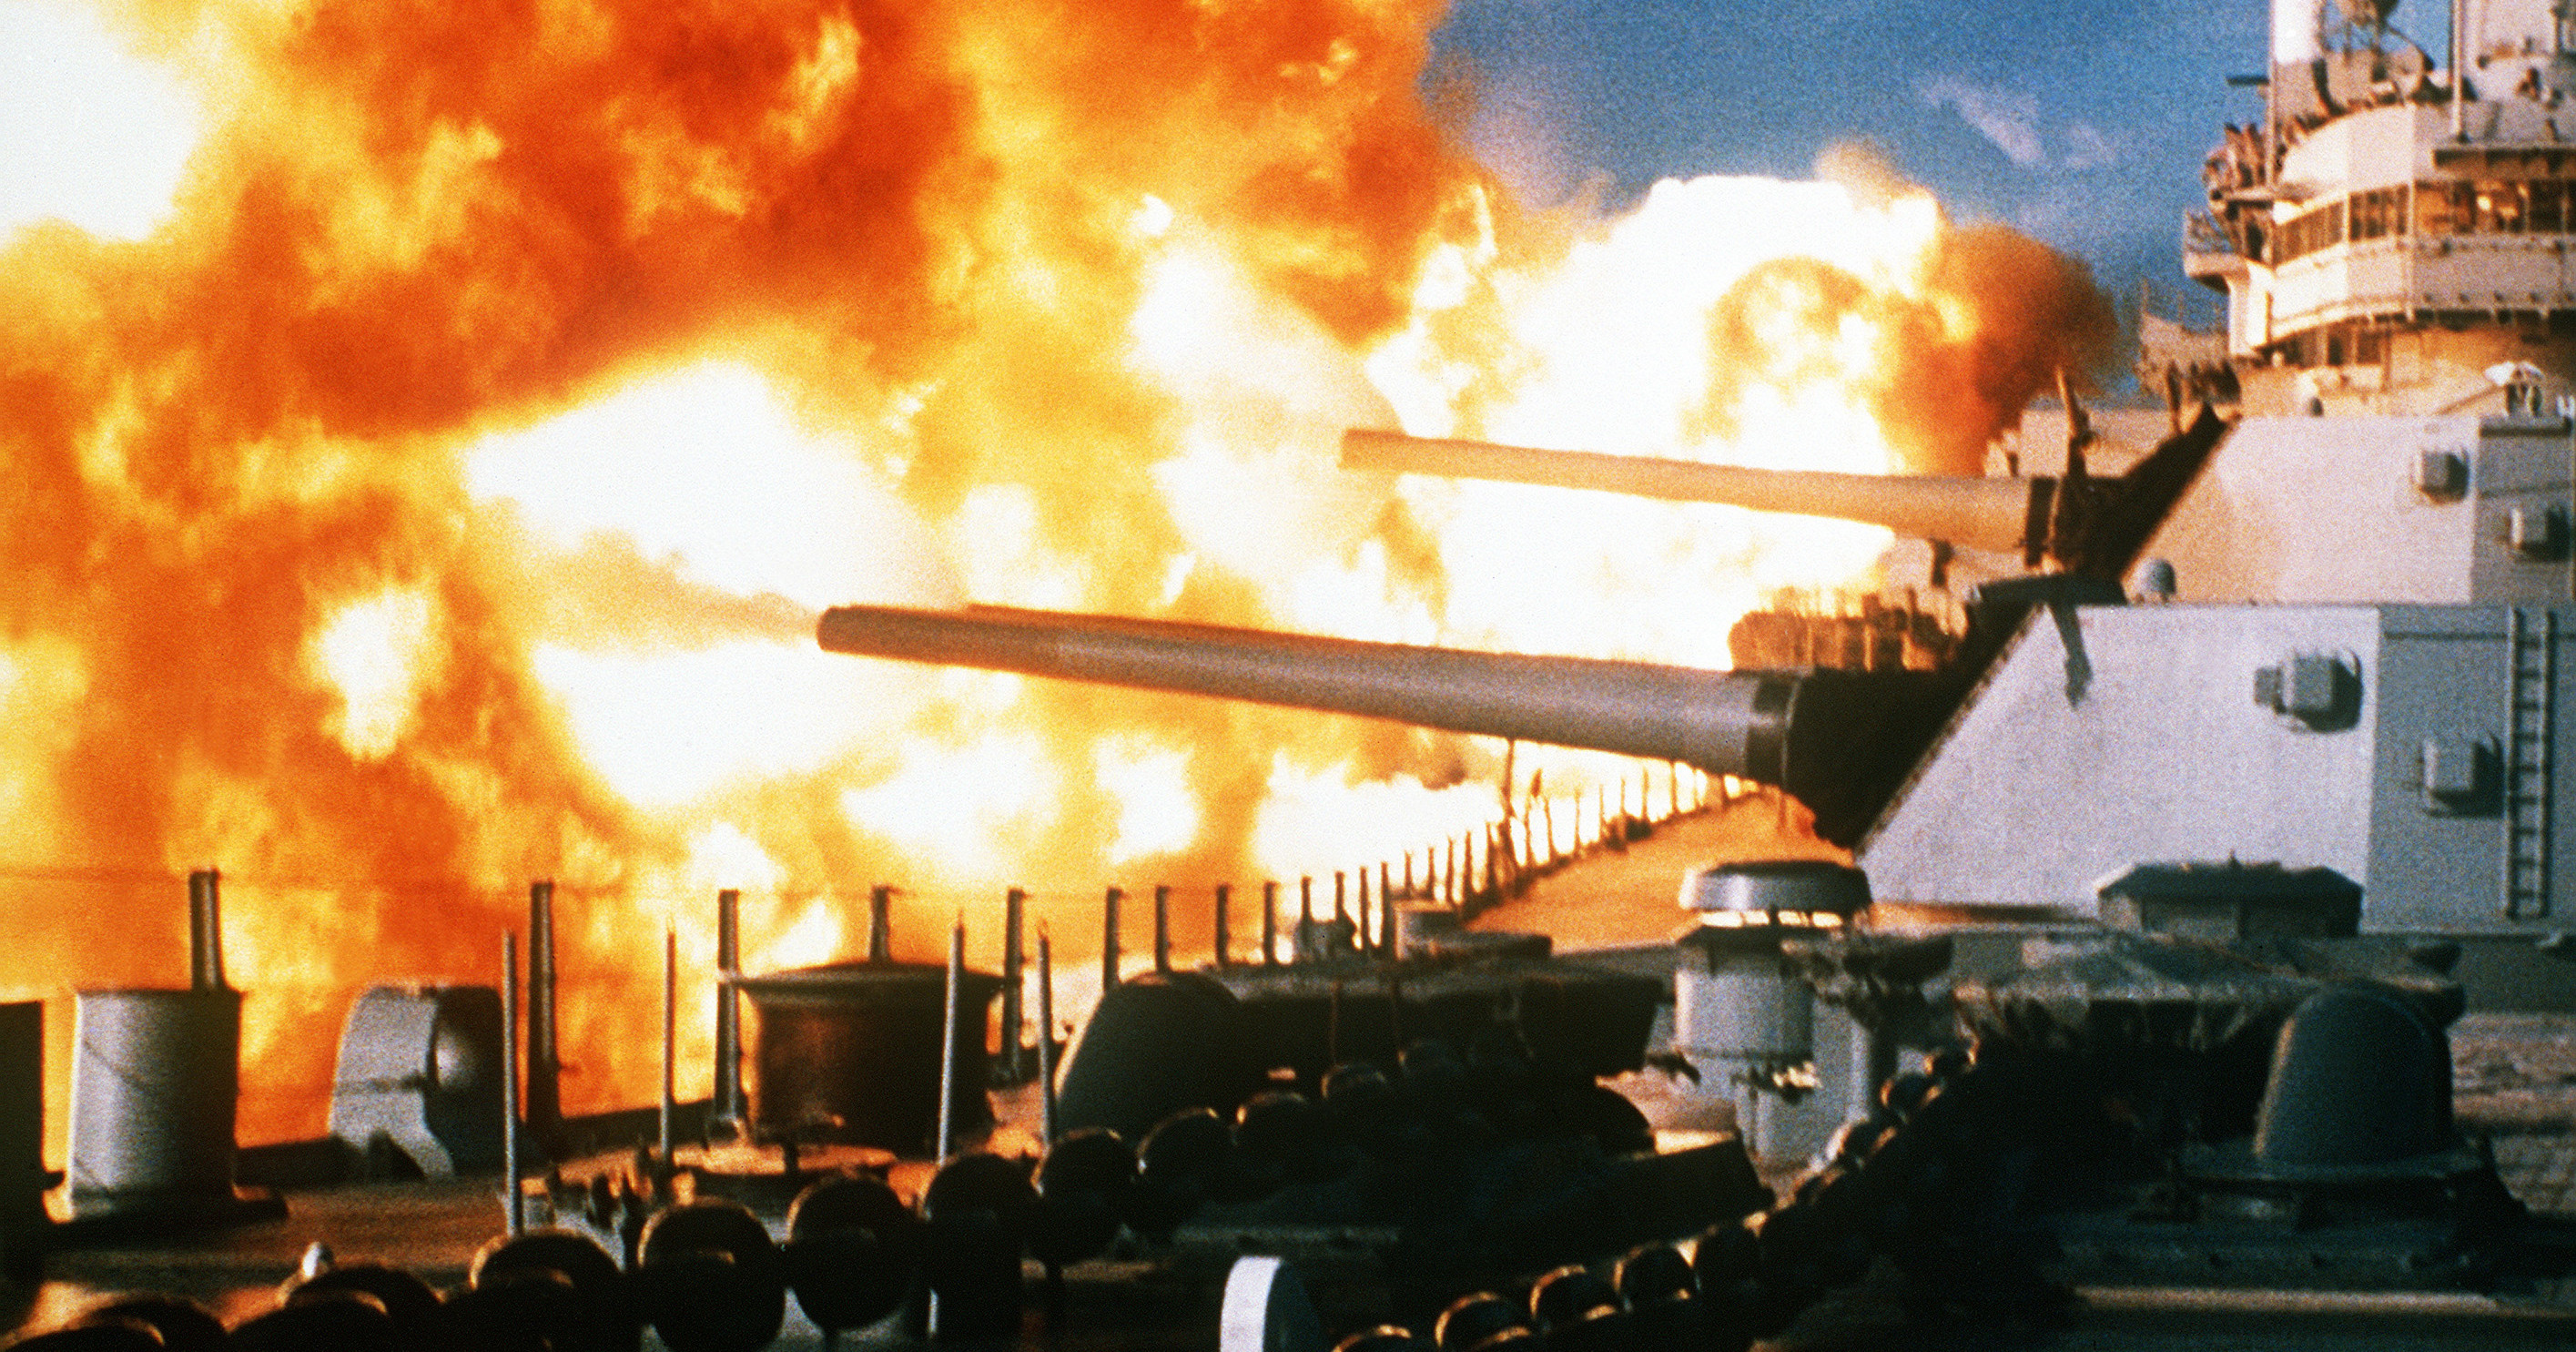 5 times the US military ripped victory from the jaws of defeat